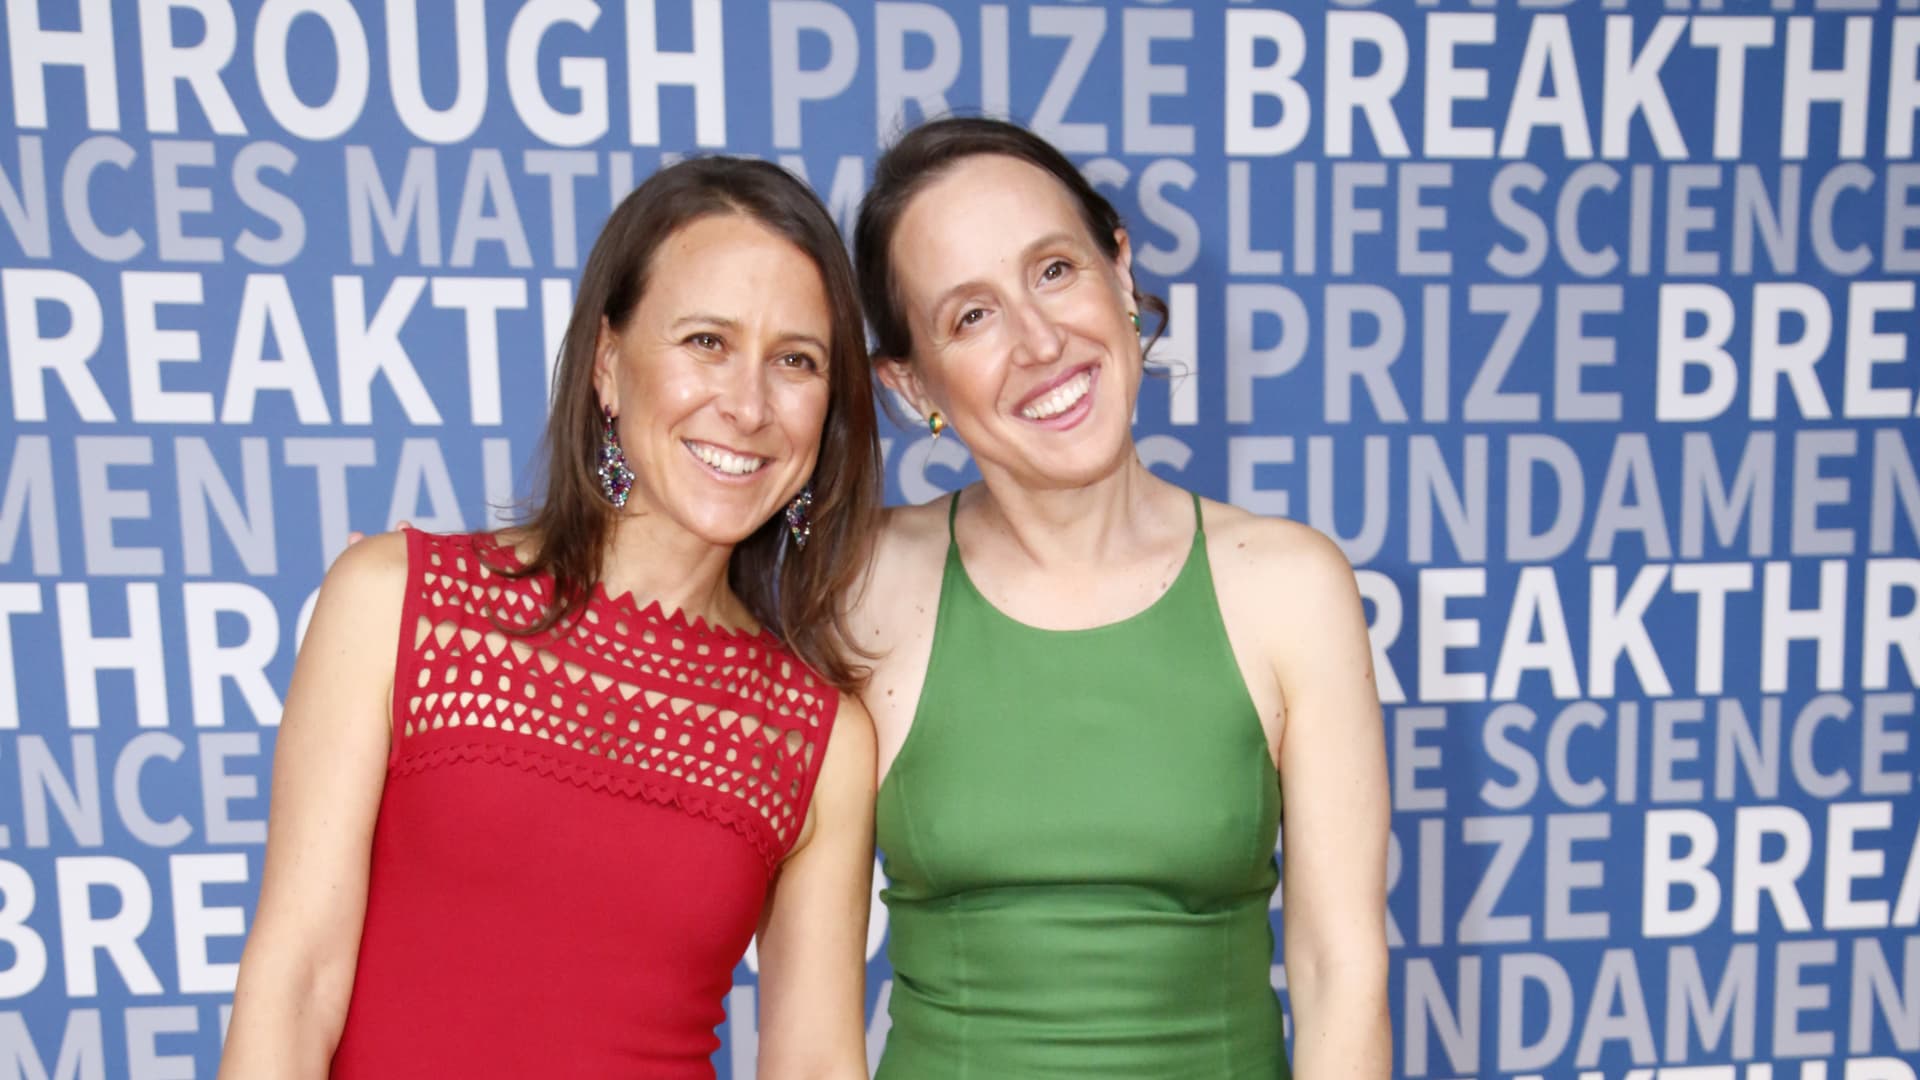 MOUNTAIN VIEW, CA - DECEMBER 04:Breakthrough Prize Co-founder Anne Wojcicki (L) and Dr. Janet Wojcicki attend the 2017 Breakthrough Prize at NASA Ames Research Center on December 4, 2016 in Mountain View, California.(Photo by Kimberly White/Getty Images for Breakthrough Prize)